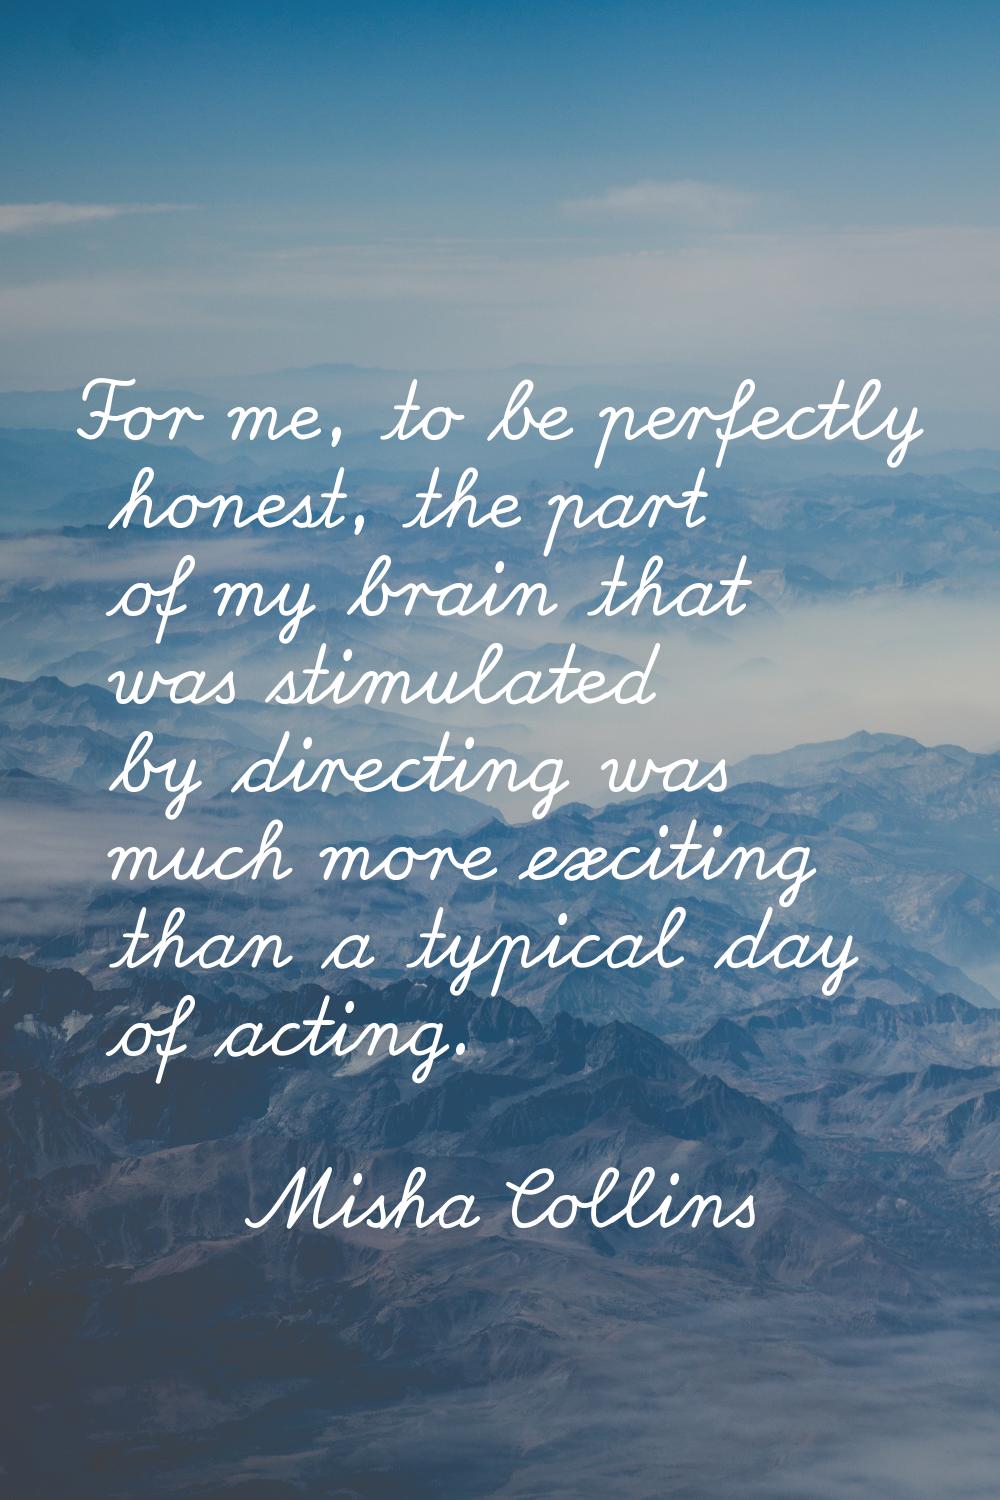 For me, to be perfectly honest, the part of my brain that was stimulated by directing was much more